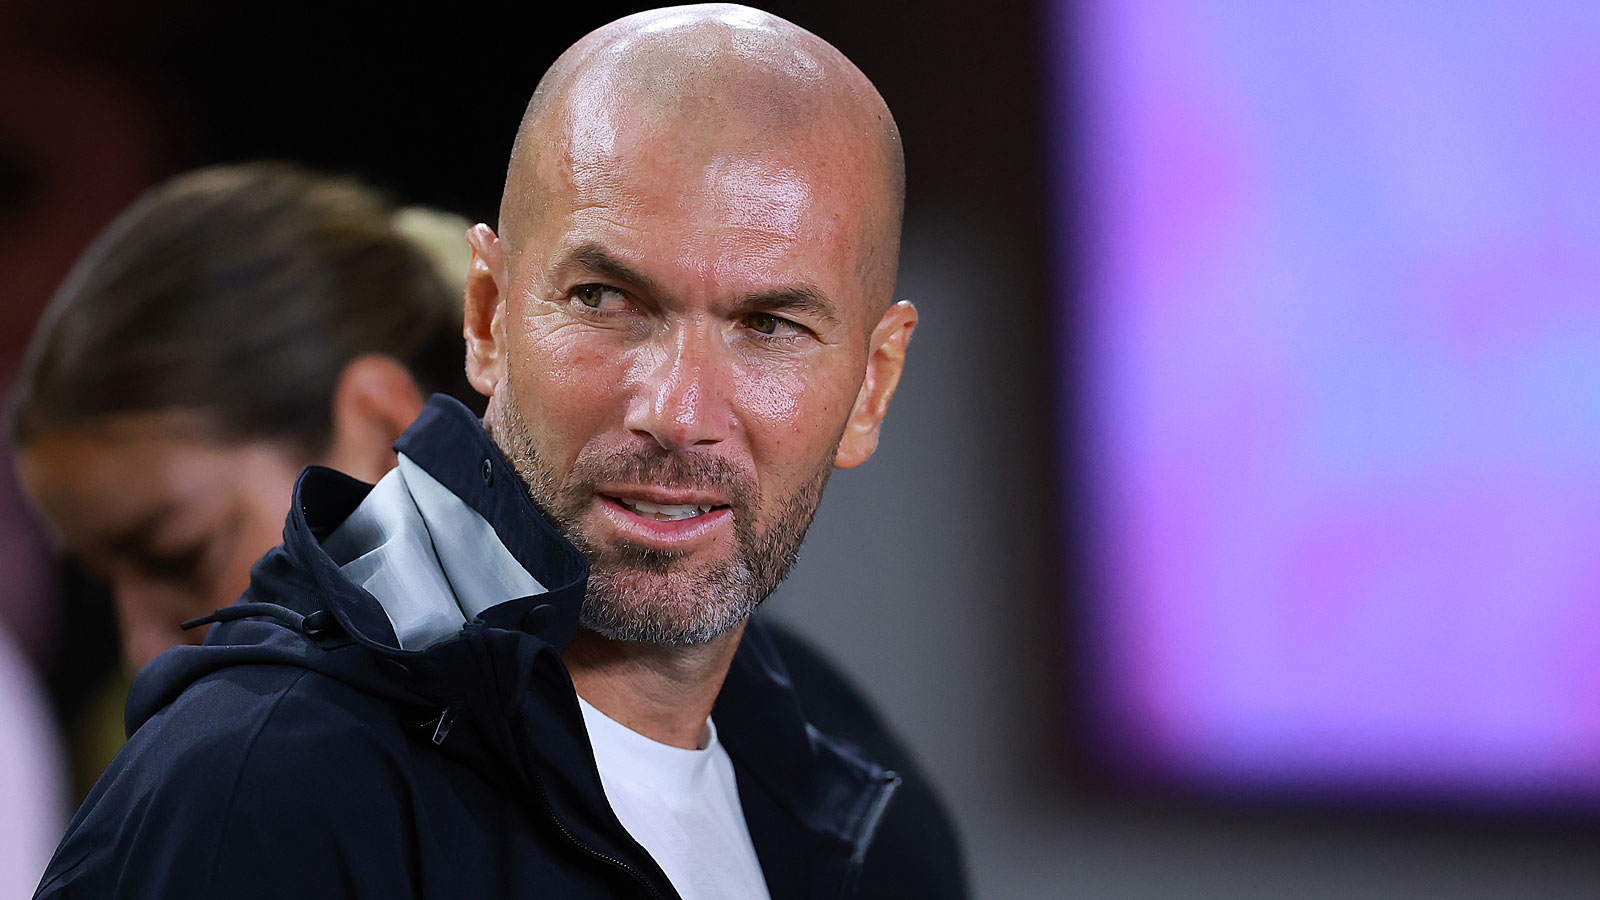 Zinedine Zidane left the door open to a potential return to Italy and more precisely Juventus, where he spent part of his playing career.